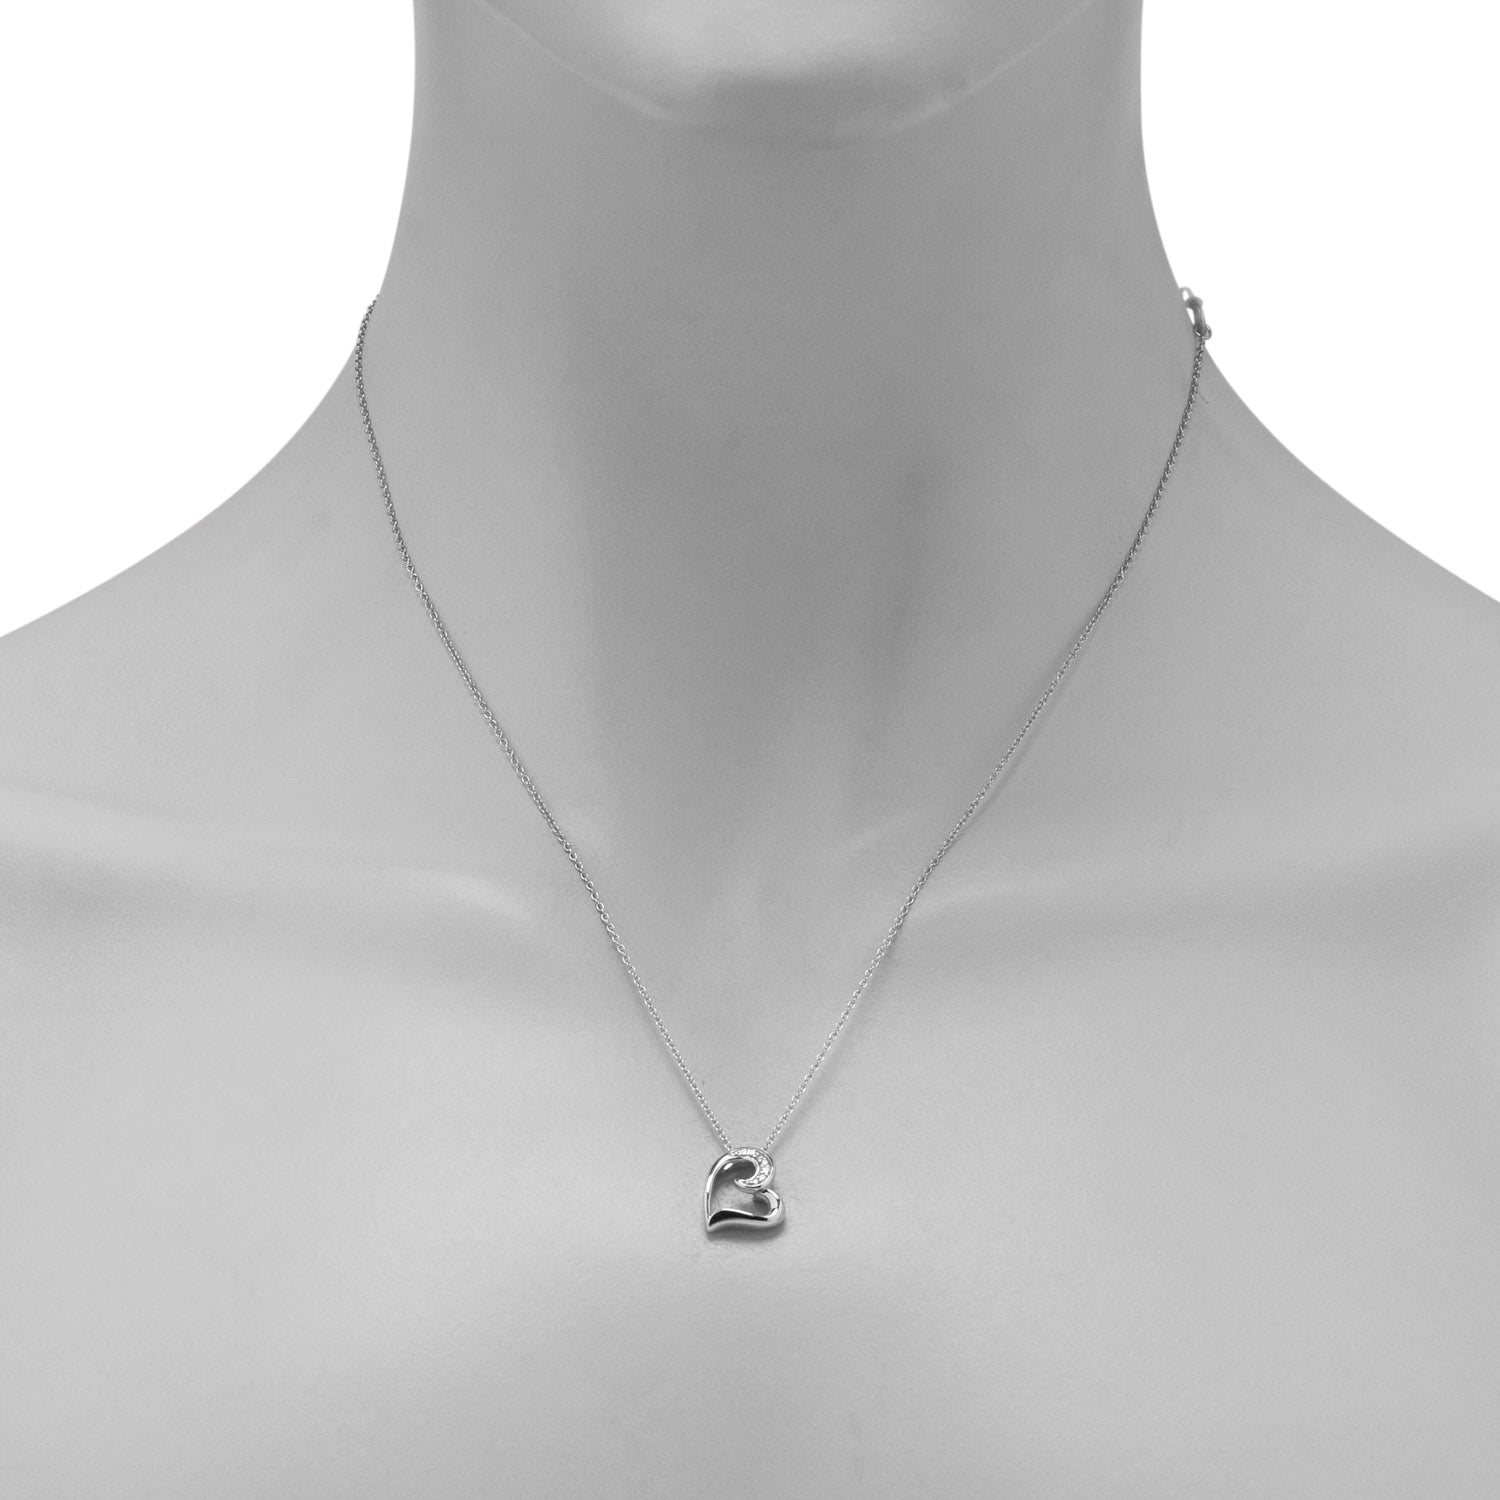 Heart Necklace in Sterling Silver with Diamonds (.03ct tw)